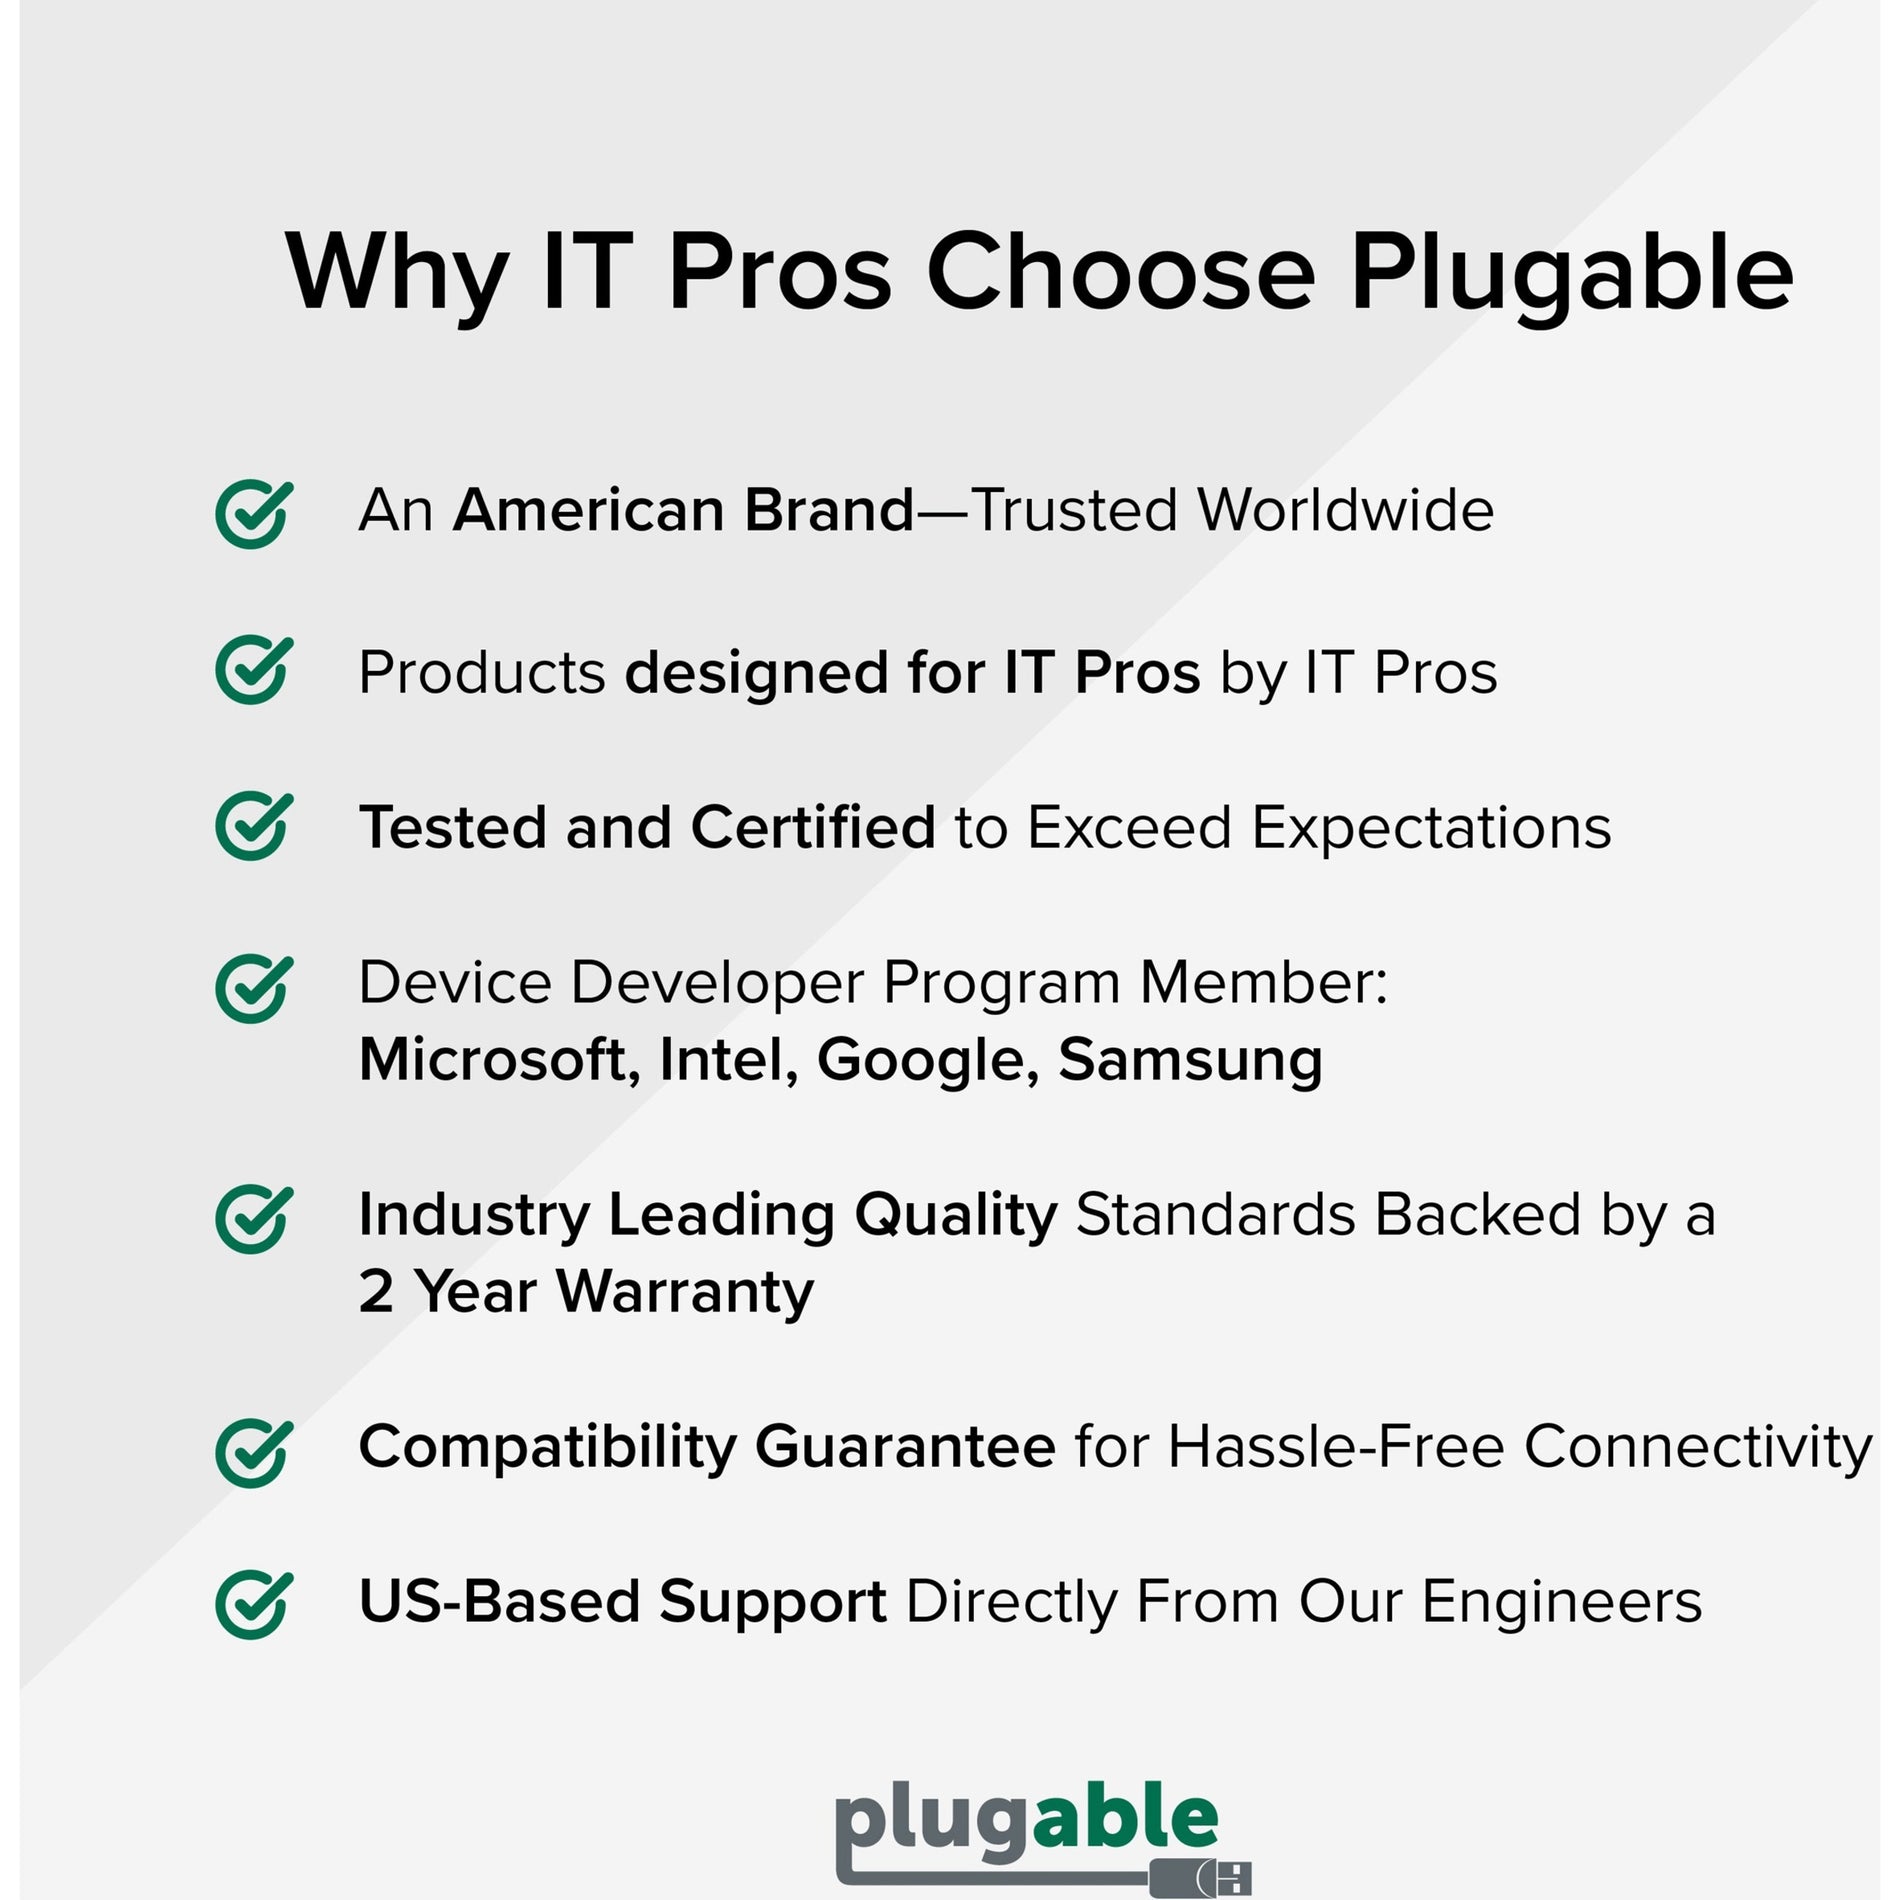 Plugable USBC-7IN1E USB-C 7-in-1 Hub with Ethernet, Multiport Adapter for ChromeOS, Windows, macOS, Linux, Dell, Google, Microsoft, Apple